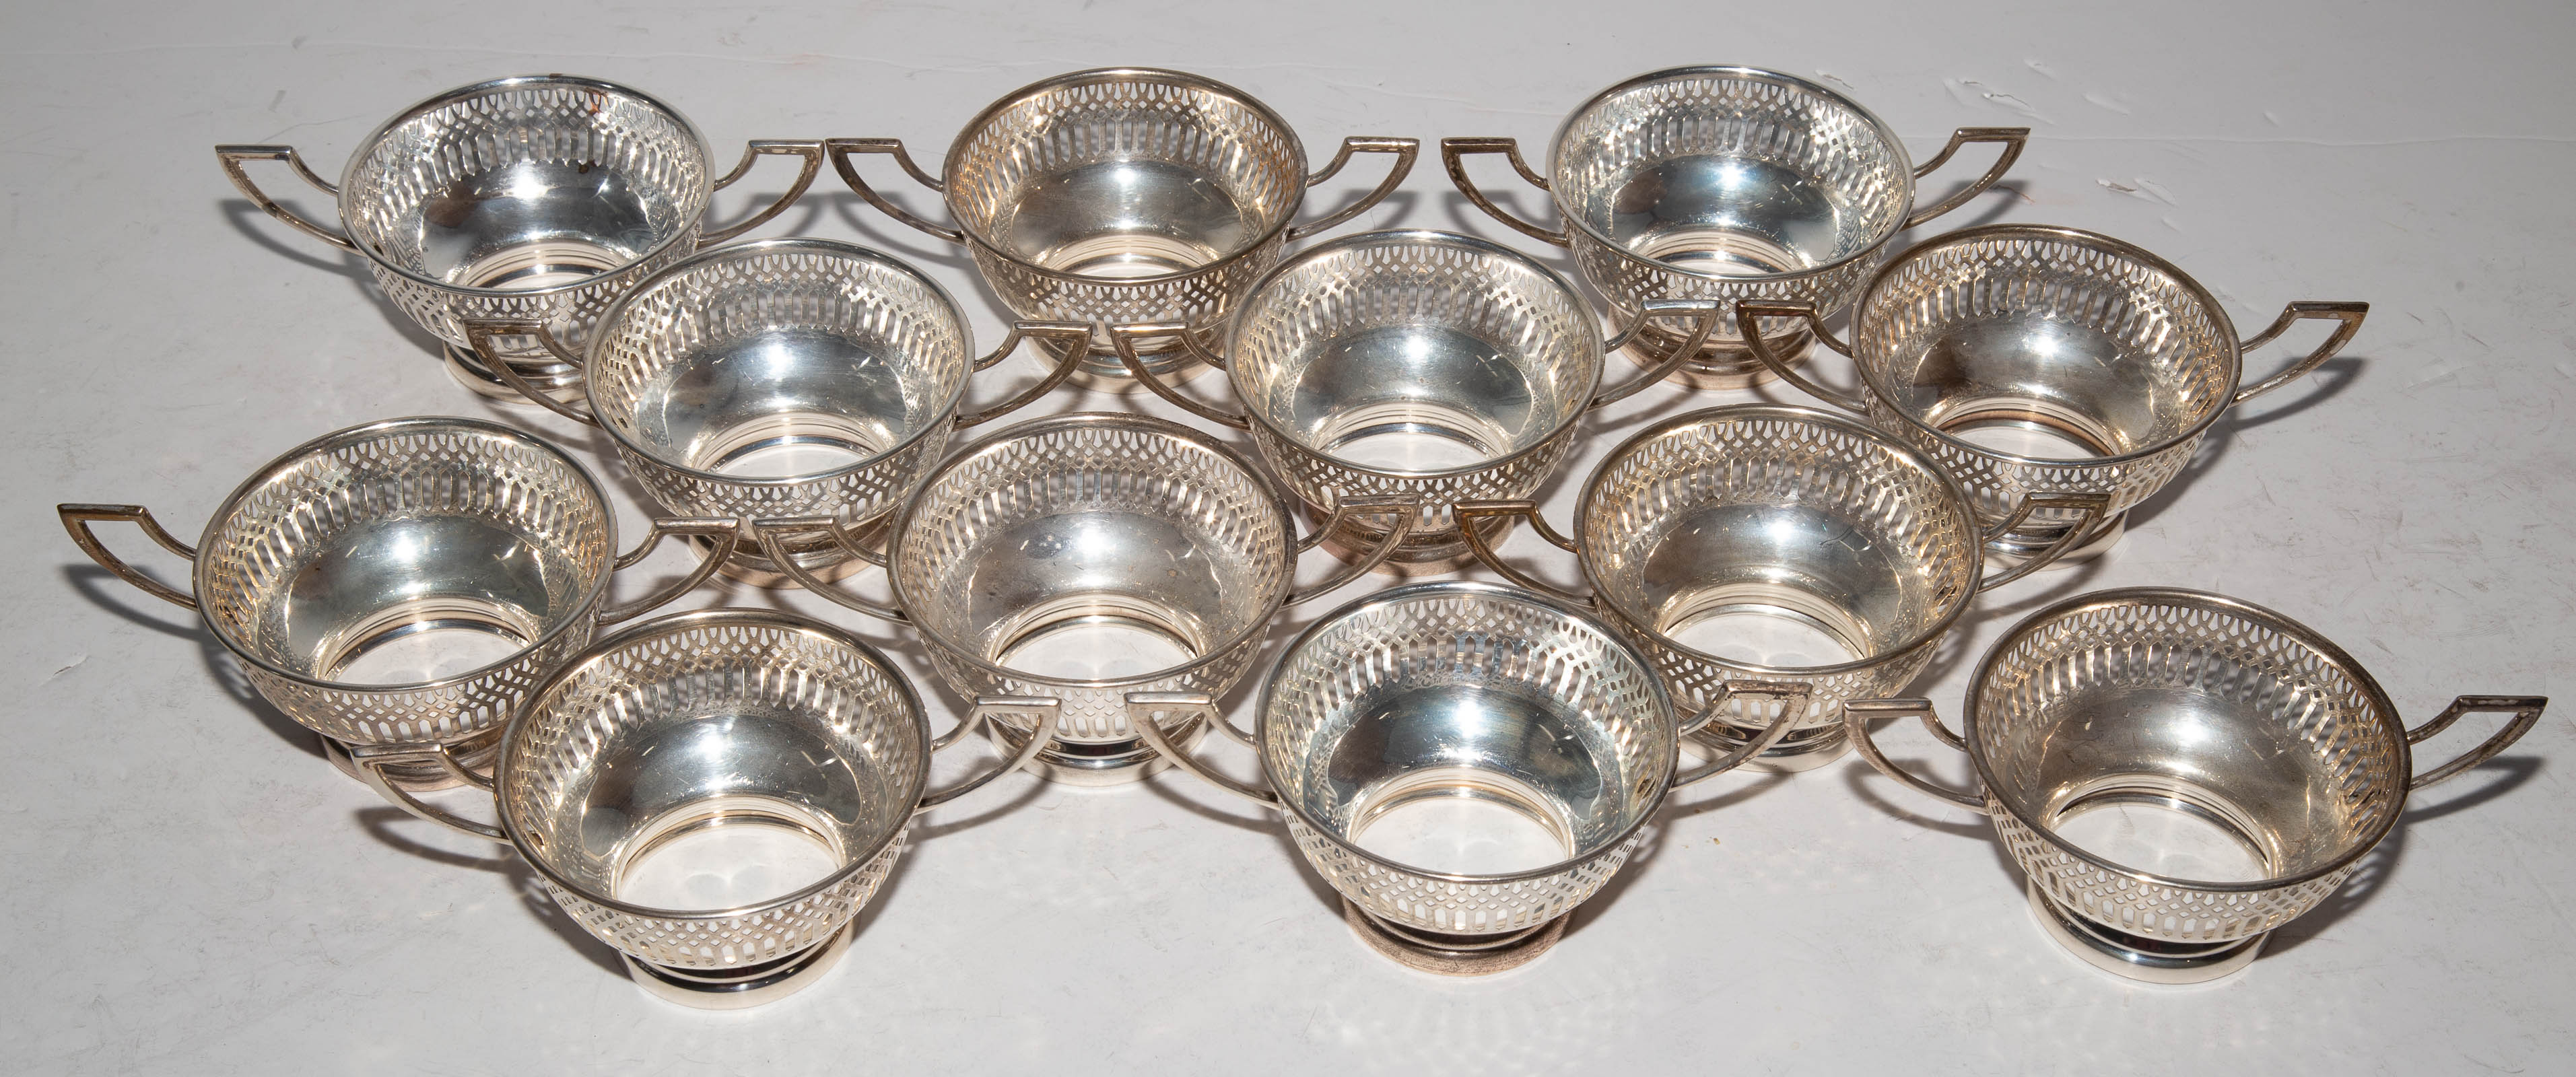 TWELVE STERLING BOUILLON BOWLS Without